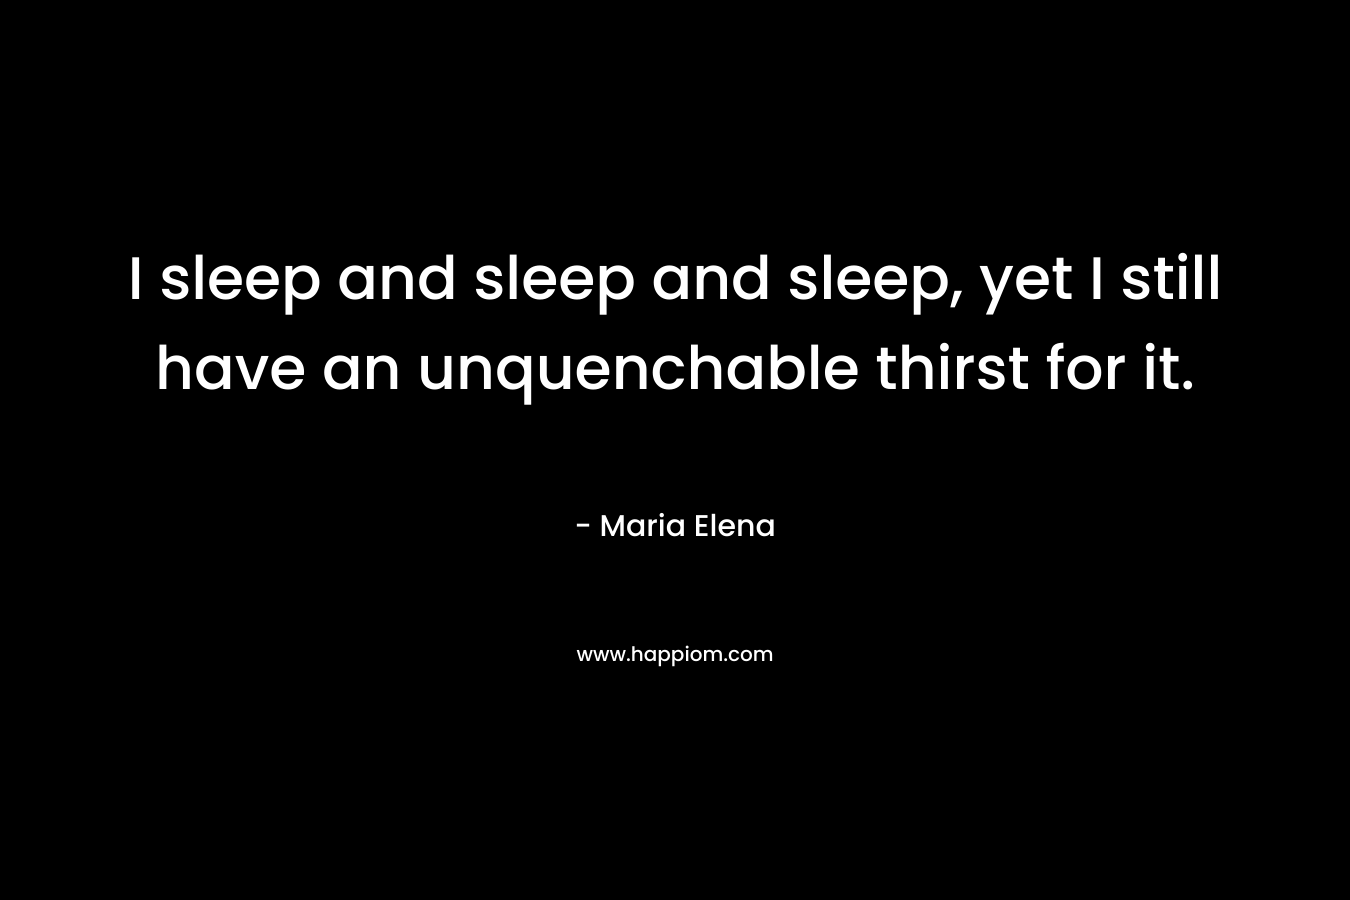 I sleep and sleep and sleep, yet I still have an unquenchable thirst for it.